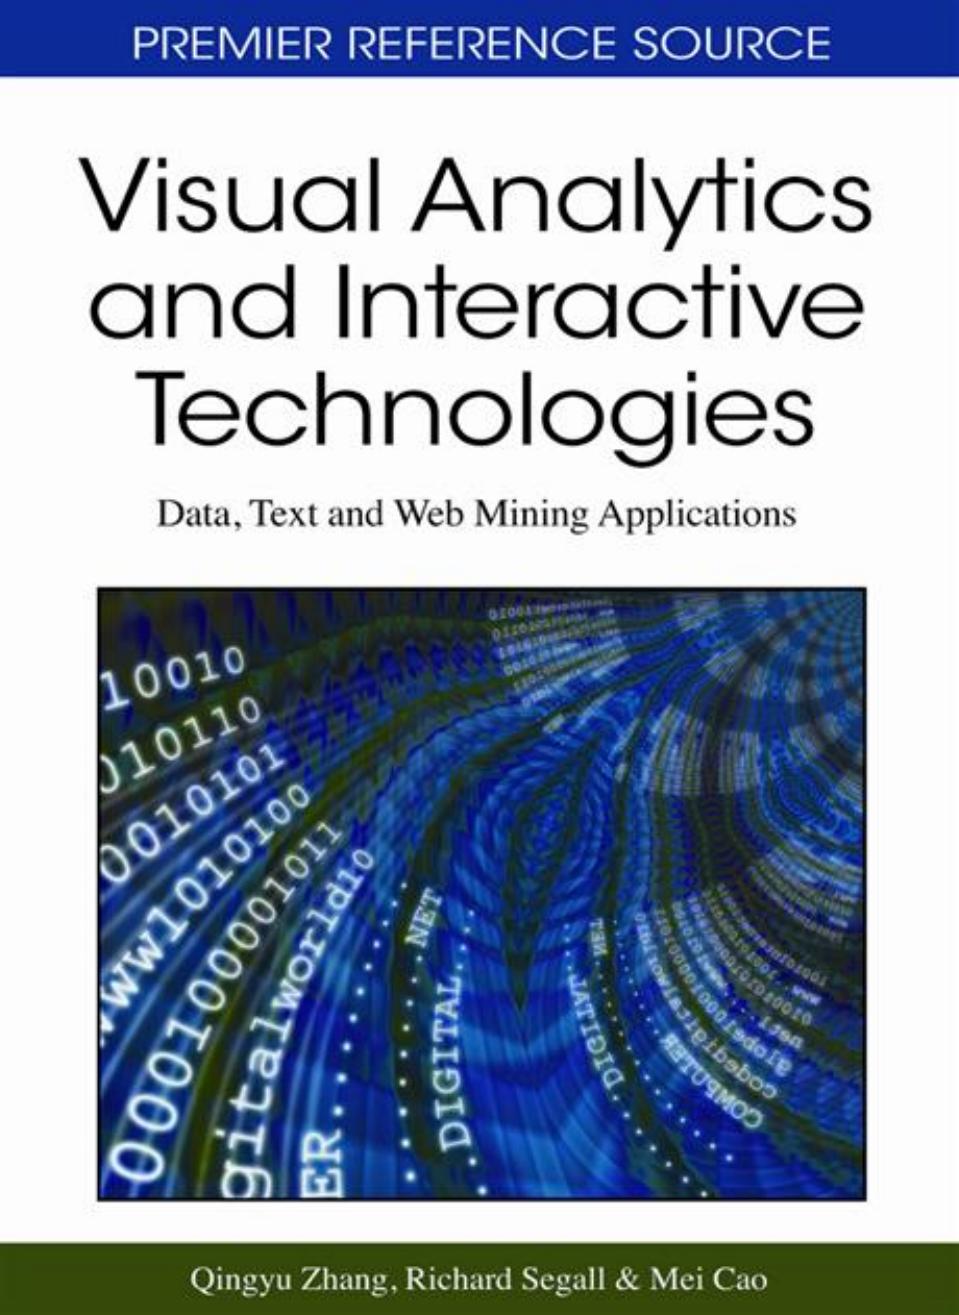 Visual Analytics and Interactive Technologies: Data, Text and Web Mining Applications: Data, Text and Web Mining Applications